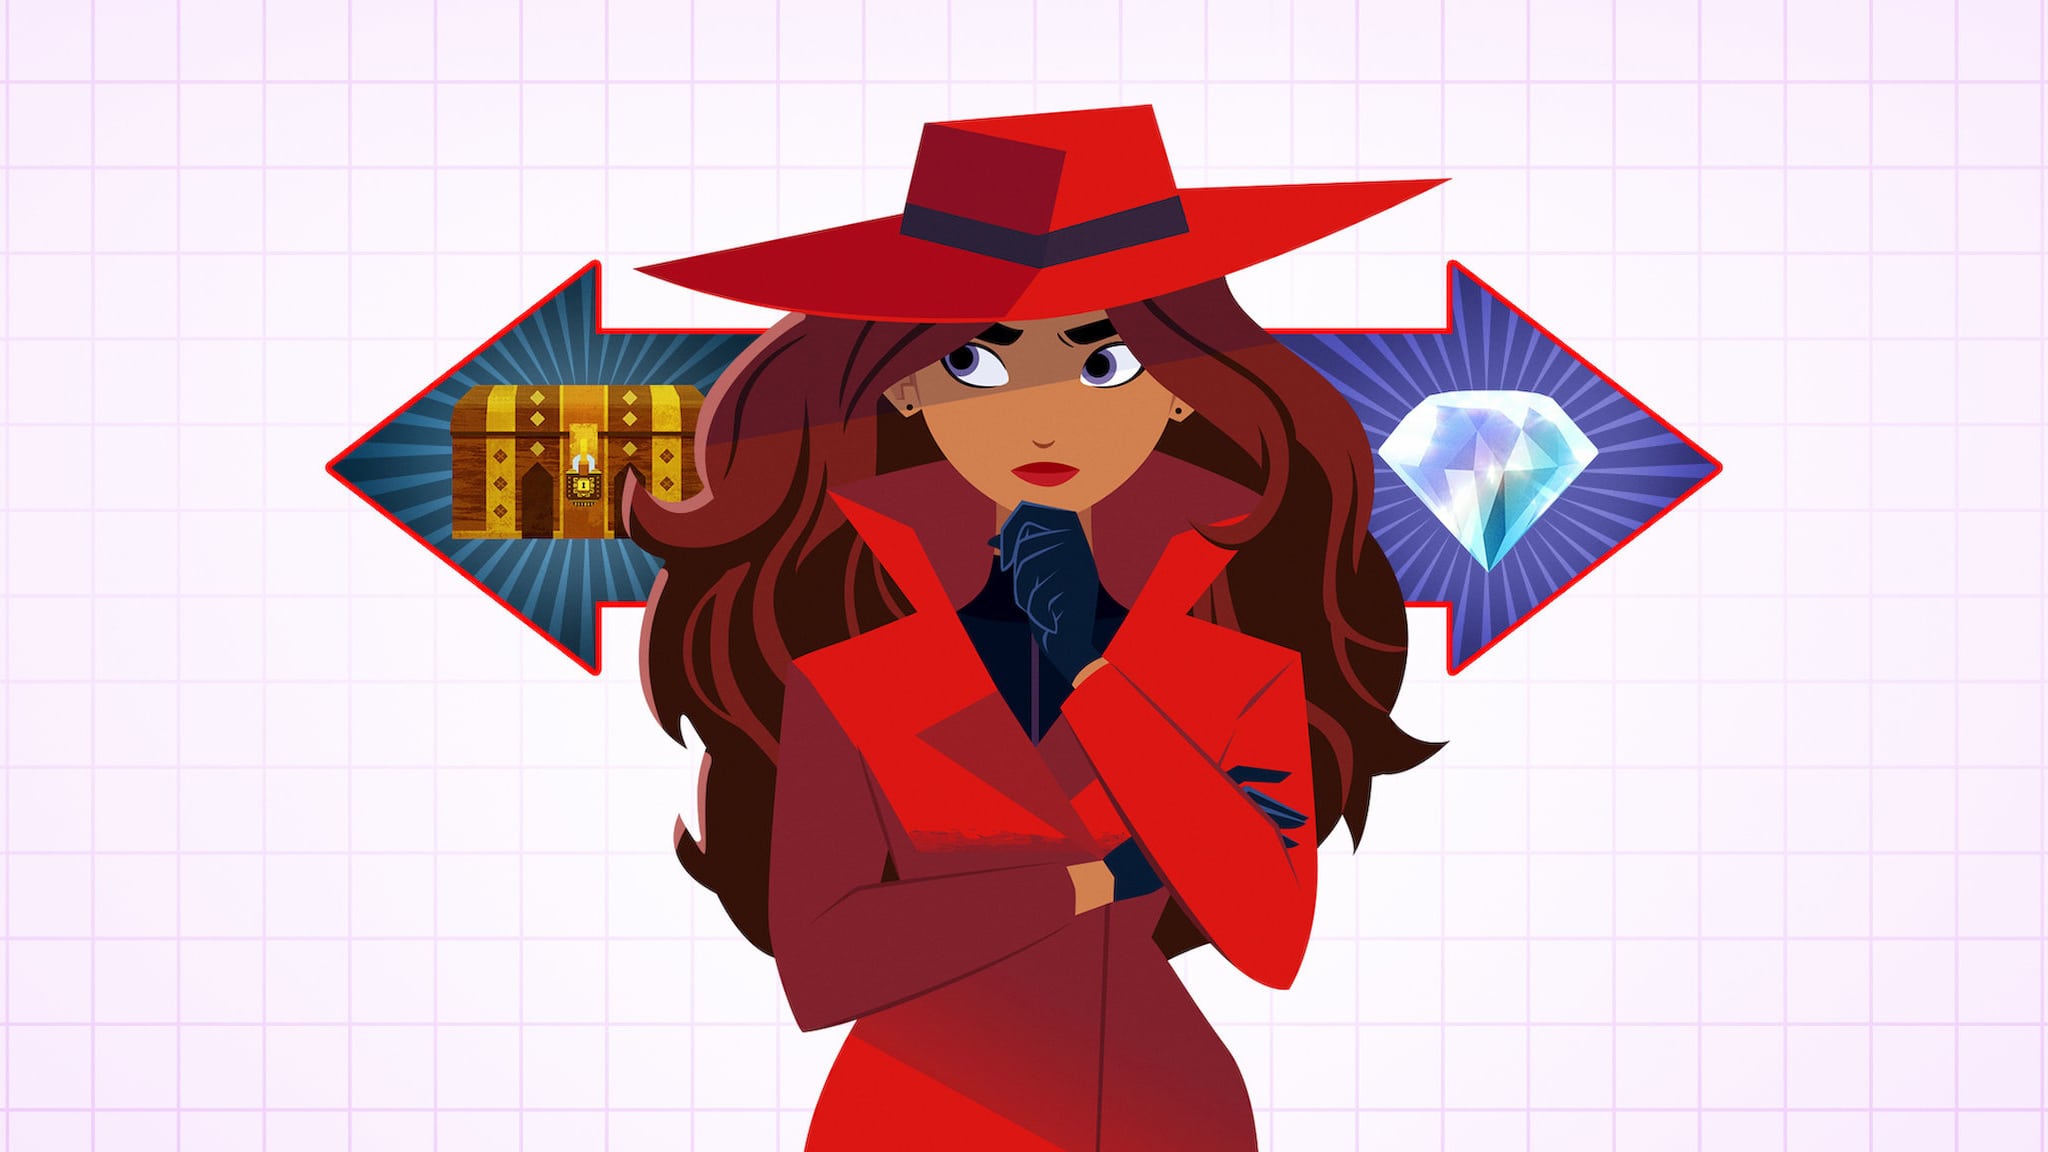 is there a carmen sandiego app